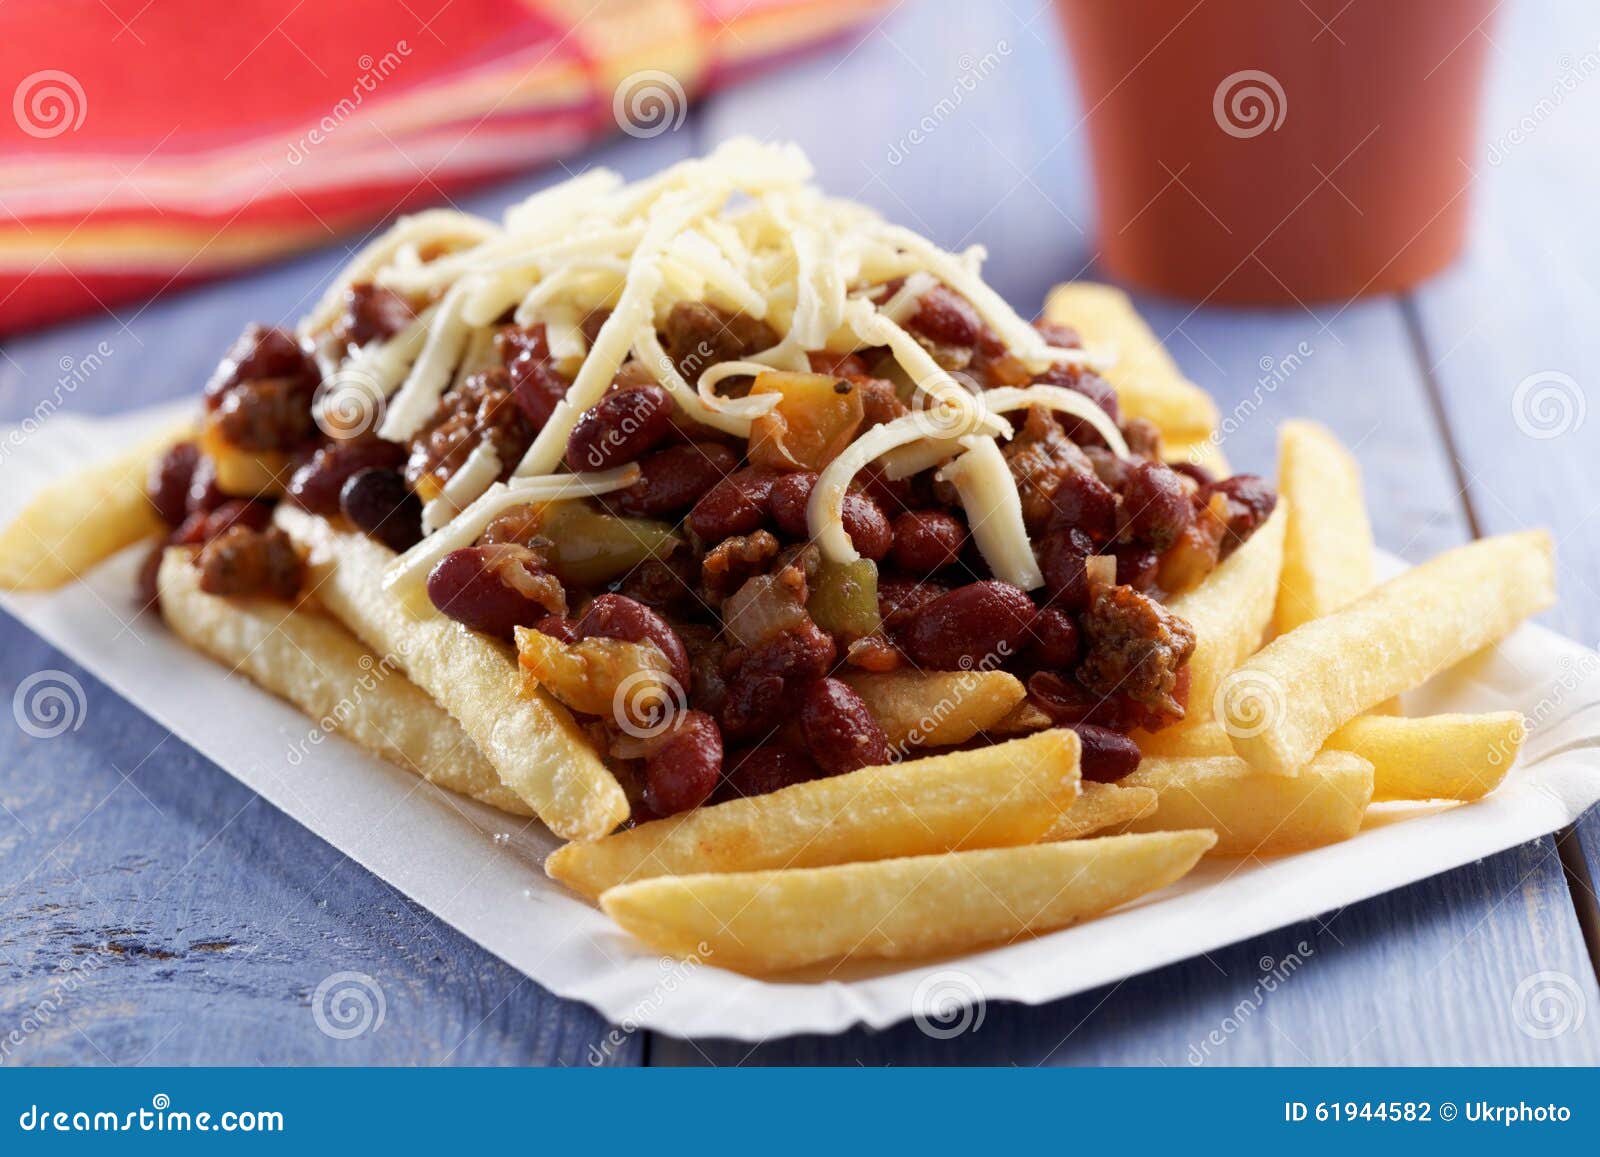 chili con carne and french fries